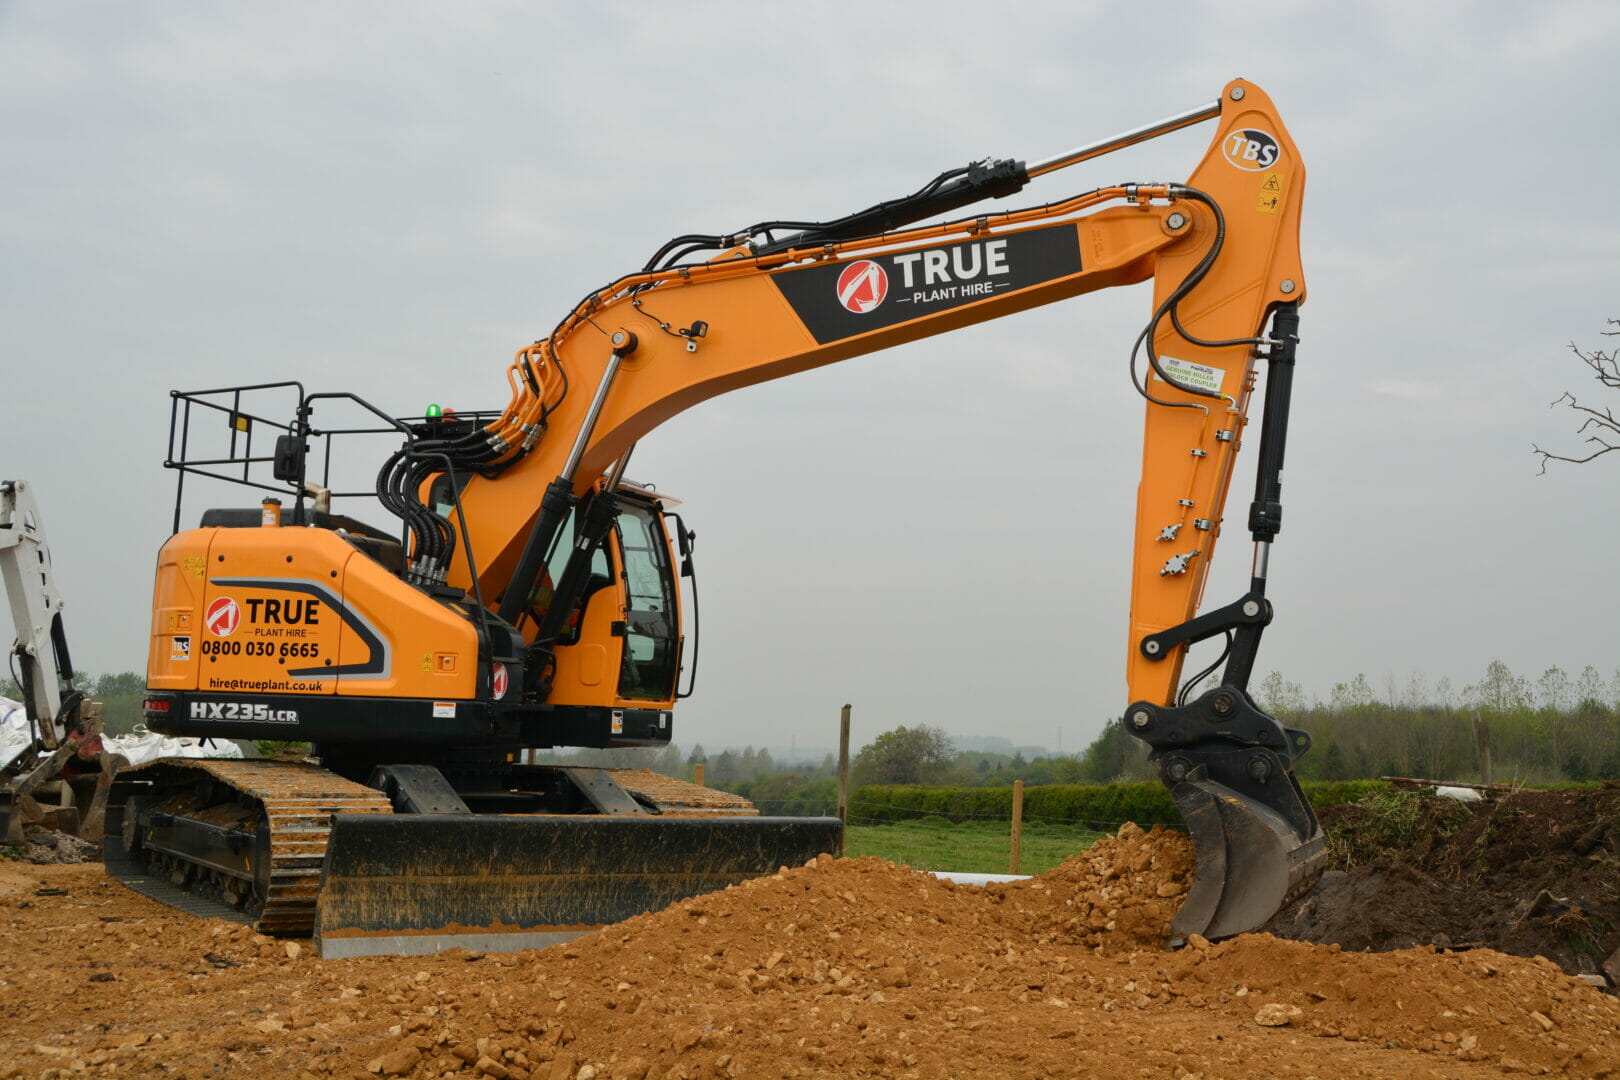 Young ambition – True Plant Hire invest in first Hyundai HX235LCR@TruelineMidlands